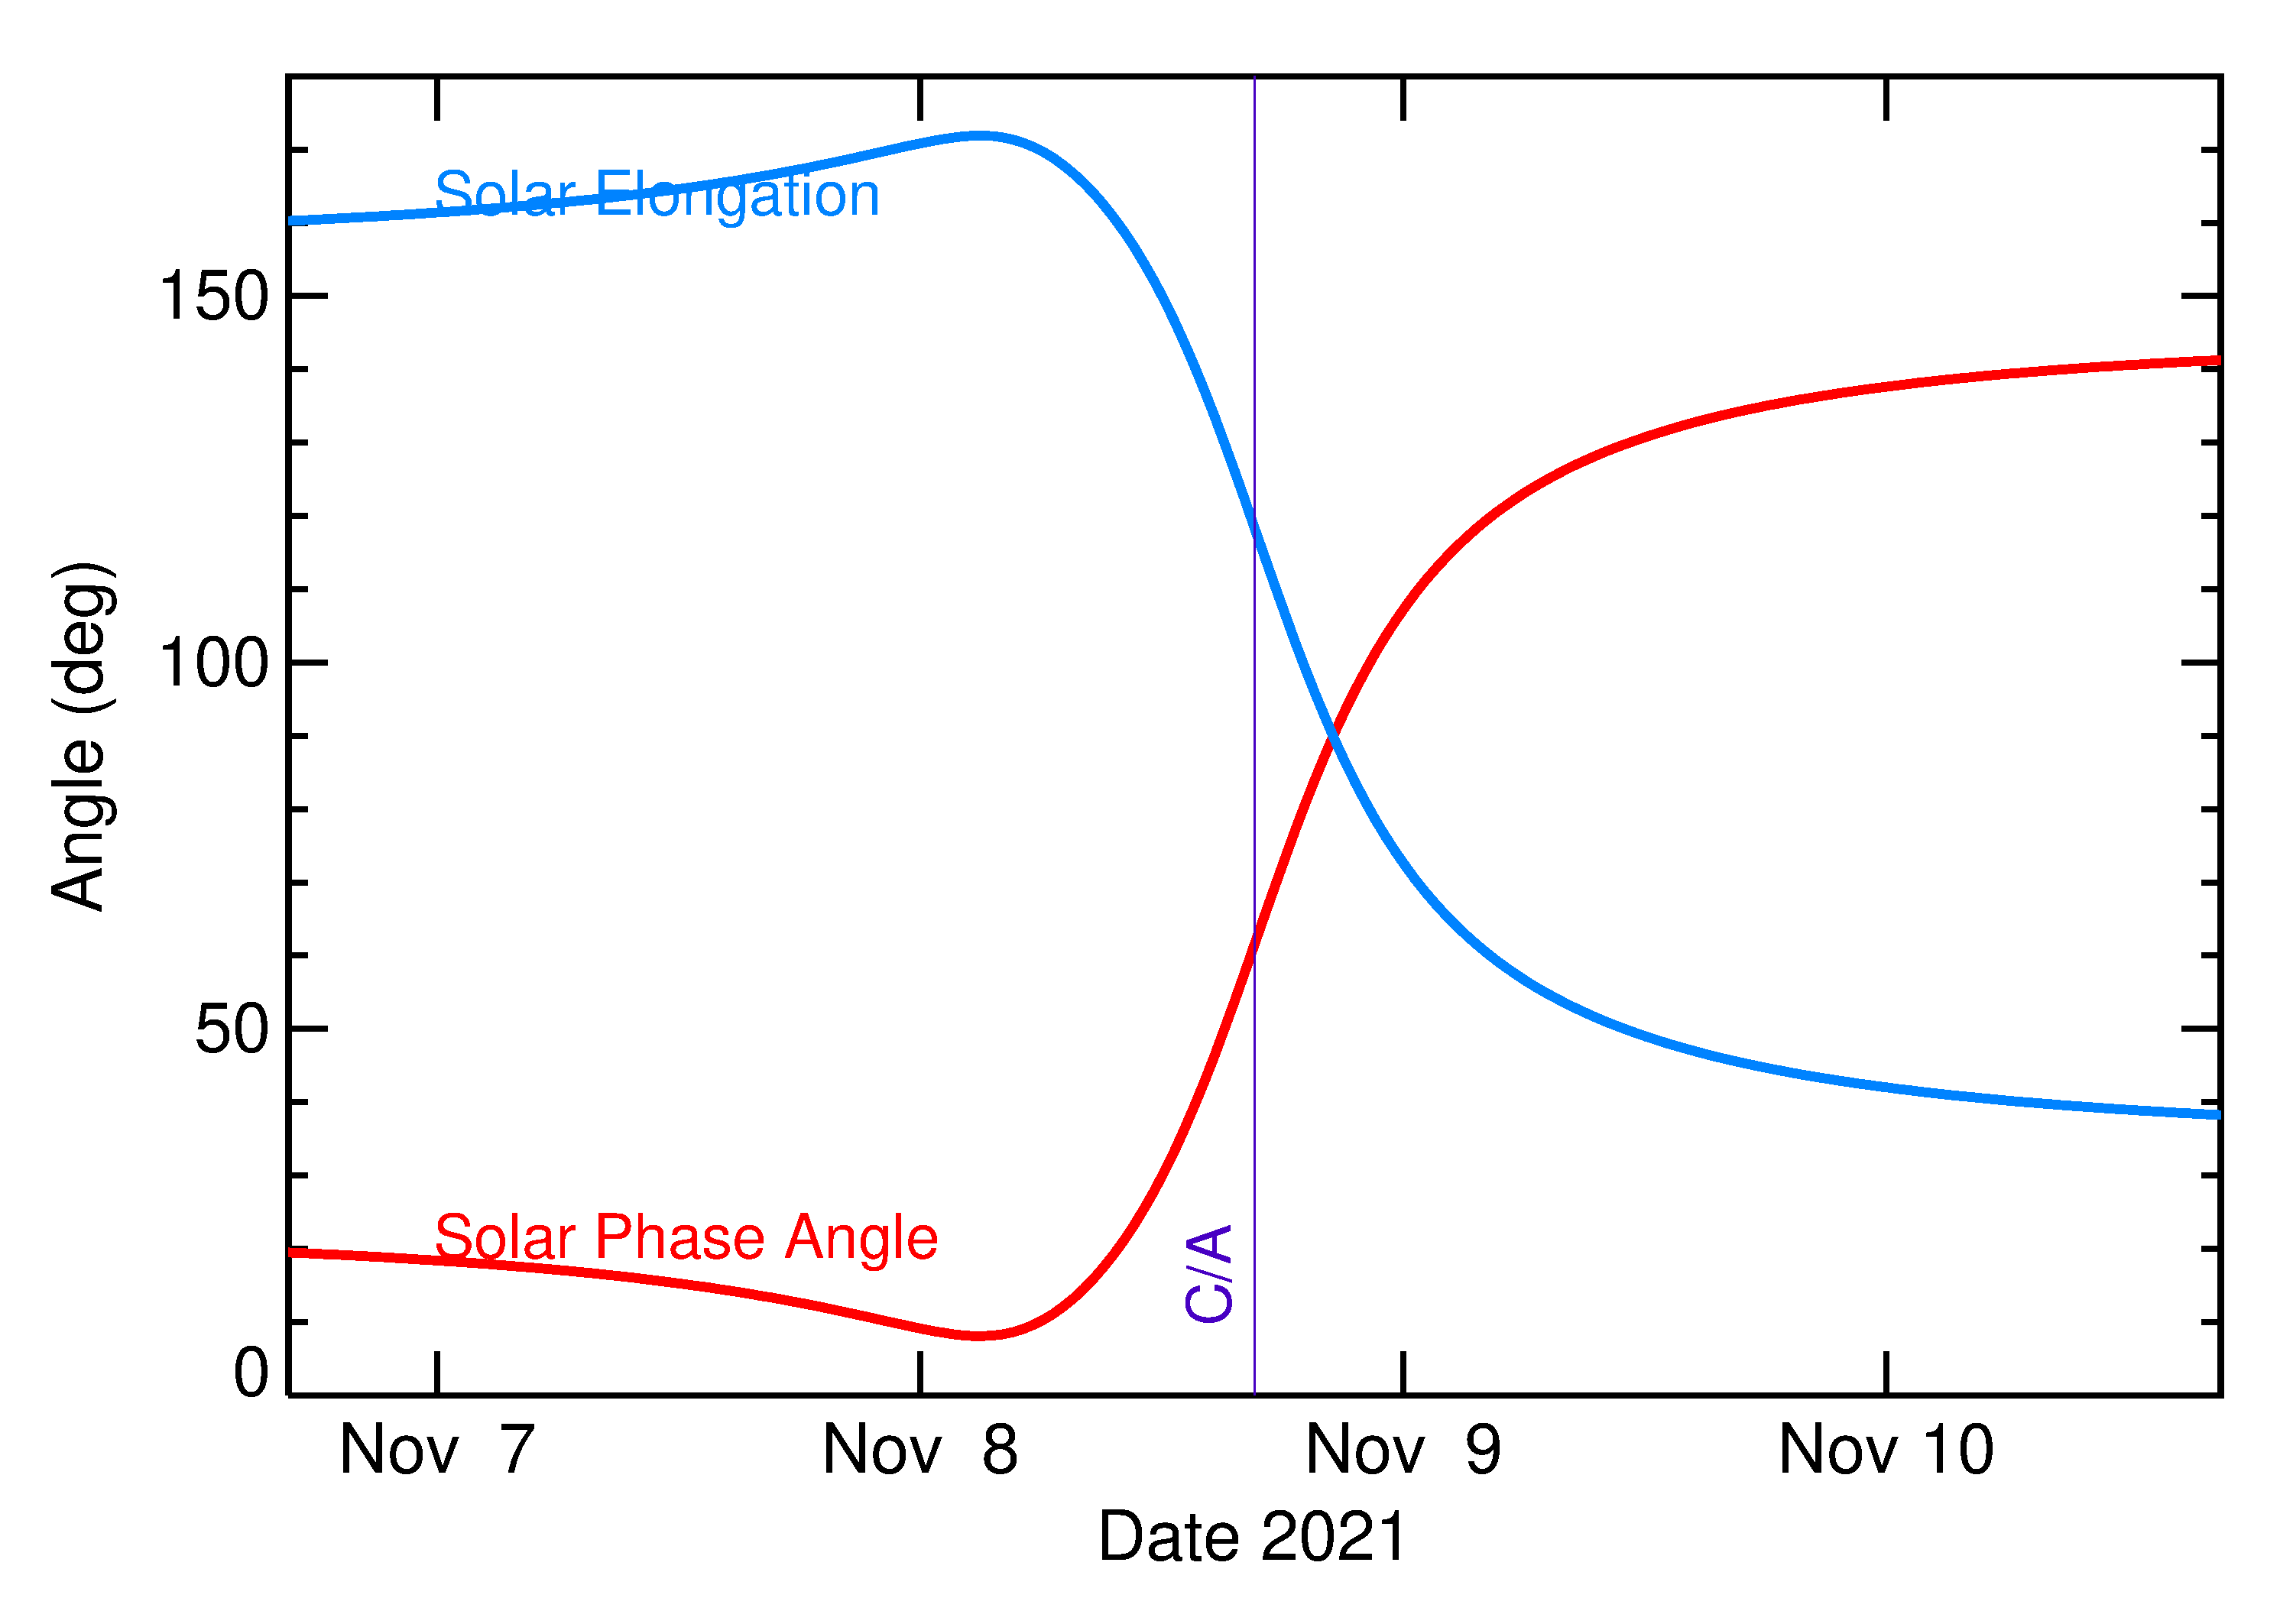 Solar Elongation and Solar Phase Angle of 2021 VM3 in the days around closest approach